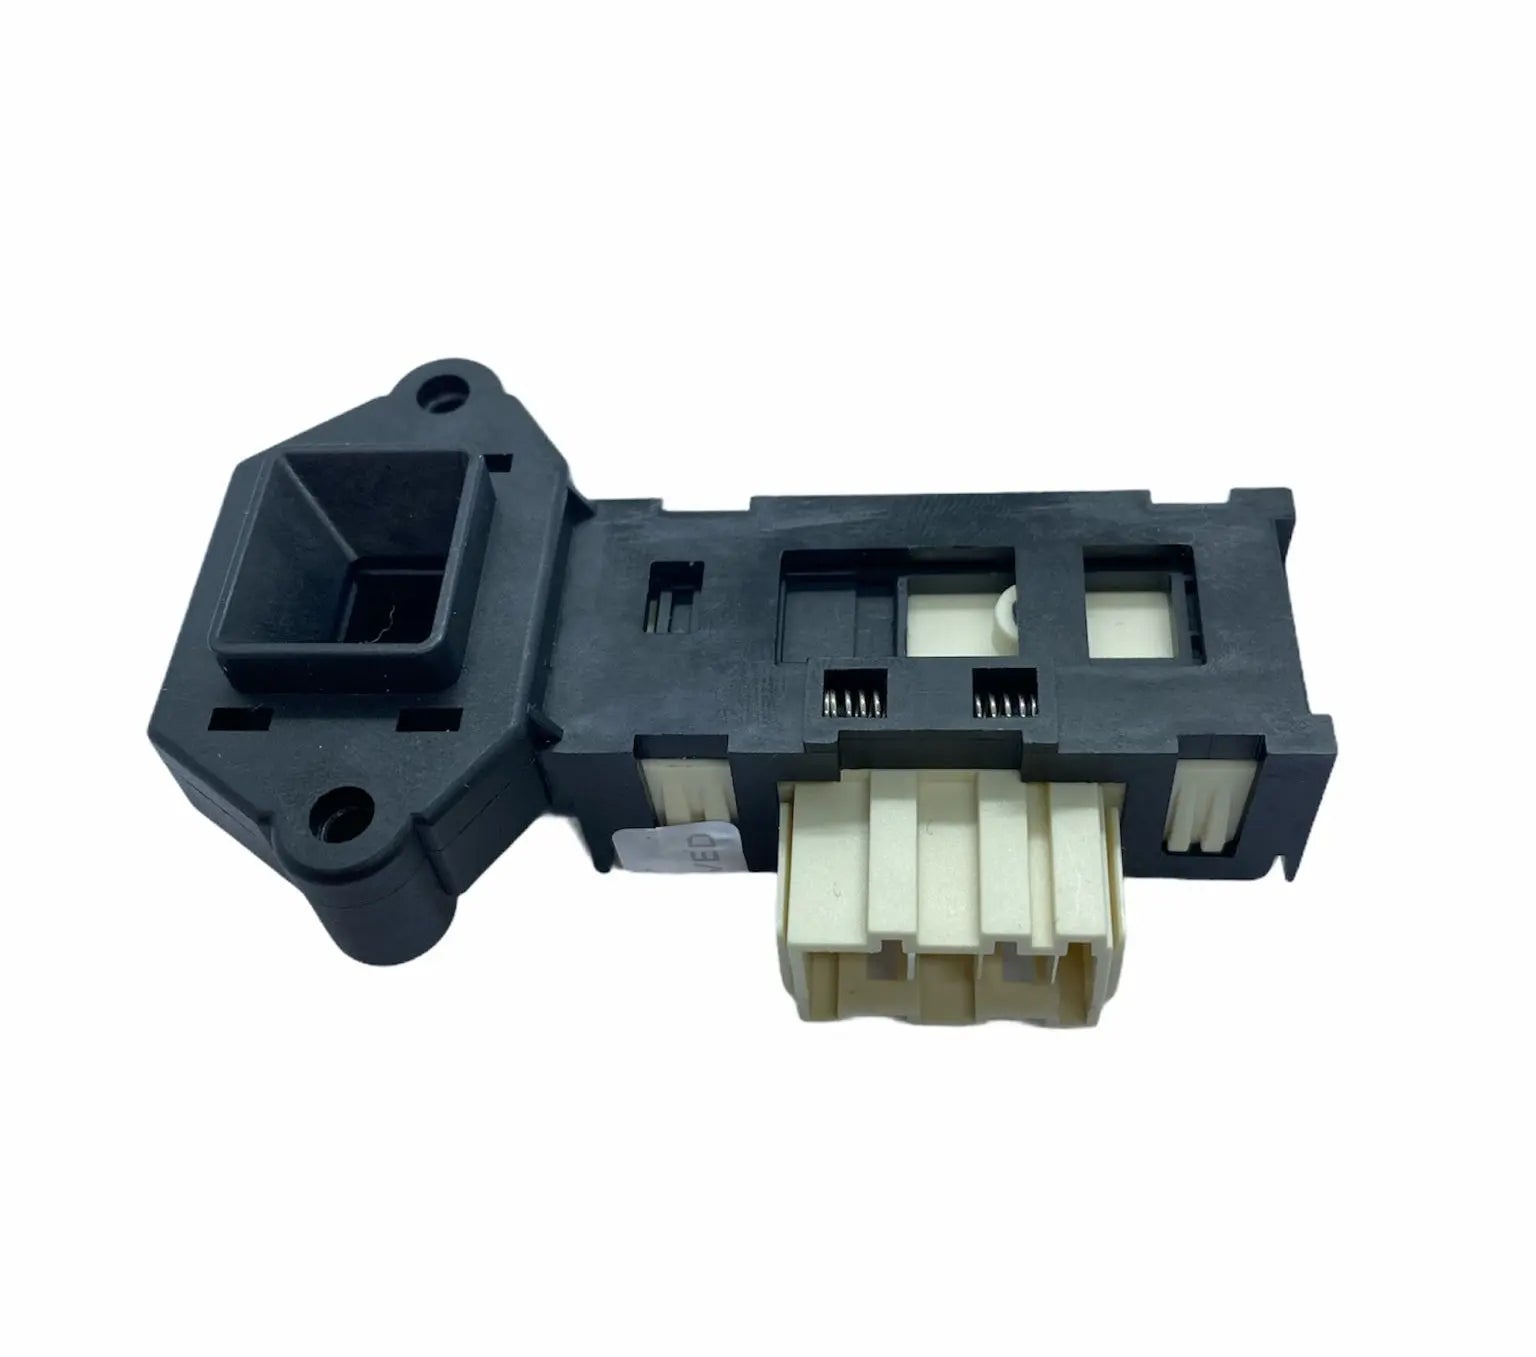 Whirlpool Washer Door Lock /Switch - WP34001011 or 34001011 , REPLACES: 34001011 4433552 AH11741529 AP6008394 EA11741529 EAP11741529 PS11741529 PD00026721 INVERTEC